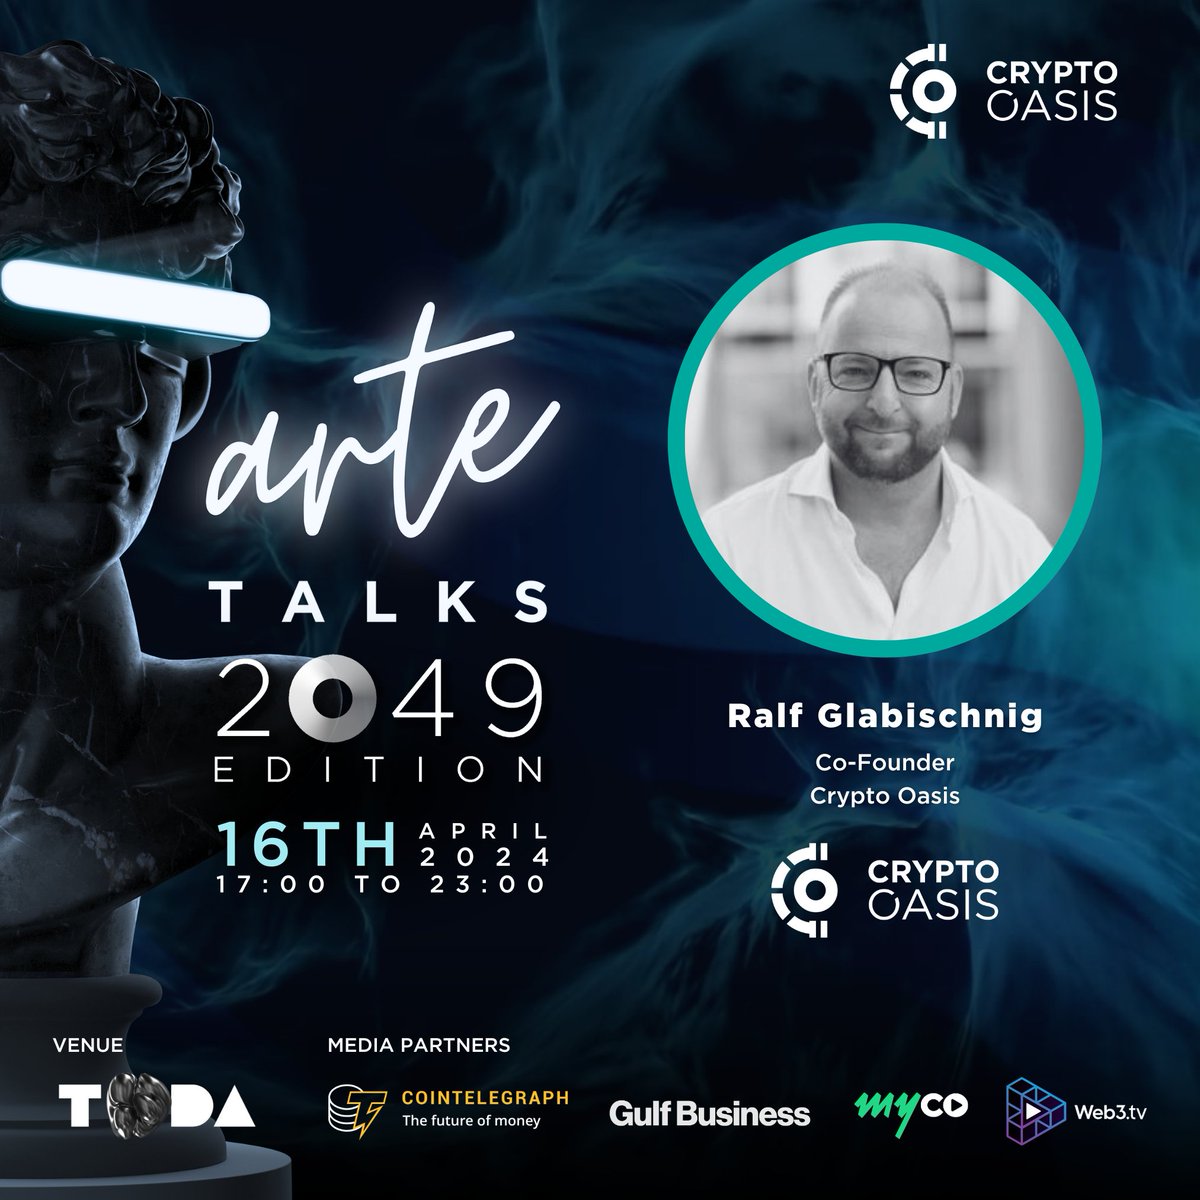 Join us at arte Talks 2049 on April 16th and discover the future of Web3 with @GLRalf, Co-Founder of Crypto Oasis. 📅 Tuesday, April 16th 📍 Theatre of Digital Art (@TODADXB) – Madinat Jumeirah, Dubai 🎟 lu.ma/arteTalks2049